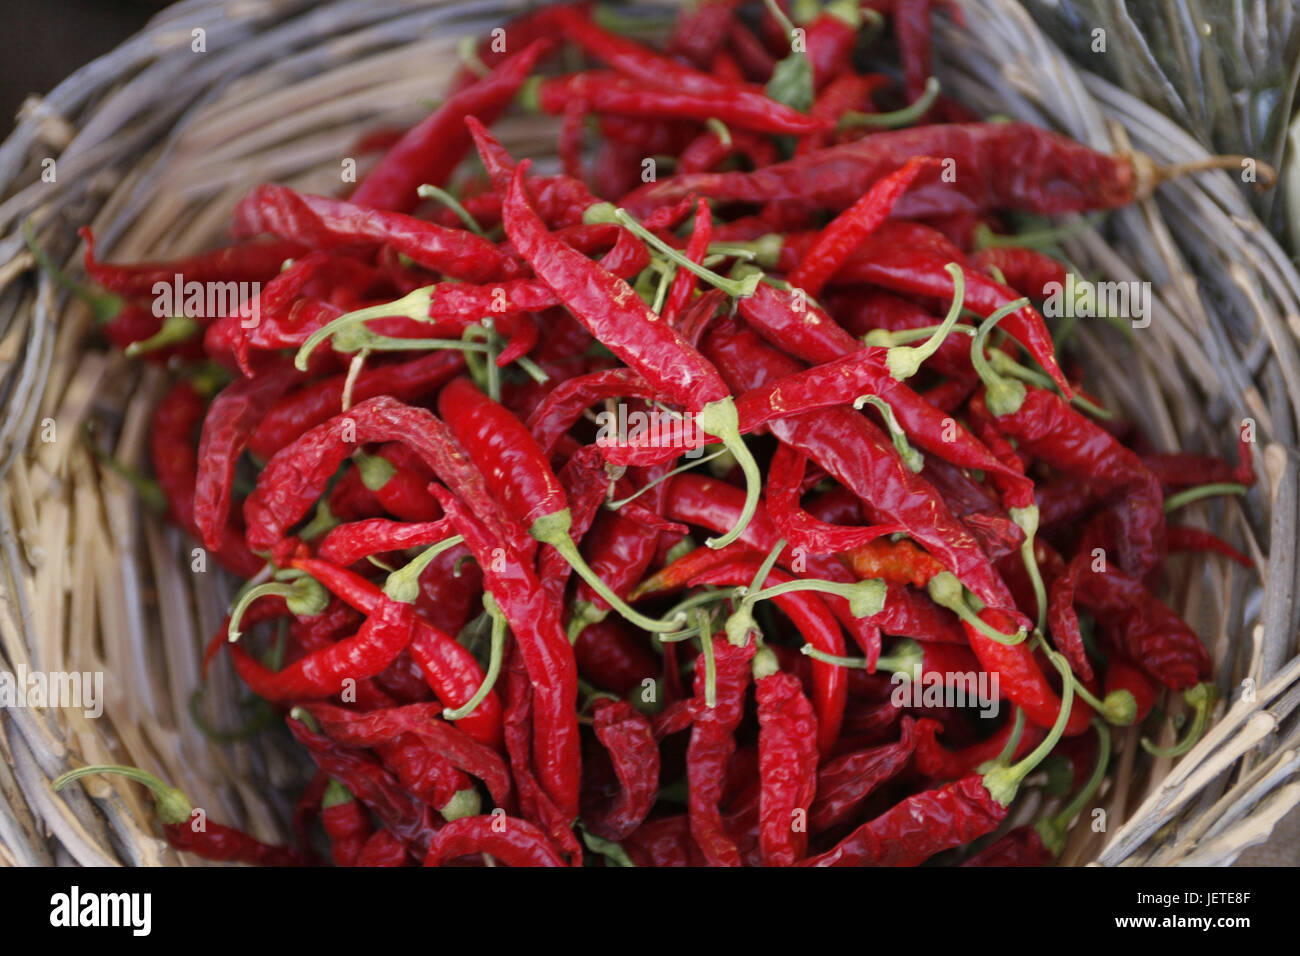 Basket, Peperonis, red, vegetables, paprika, pods, chilli pods, paprika, chilli, pepper pods, Capsicum, icon, spice, sharply, sharpness, piquant, Food, Stock Photo